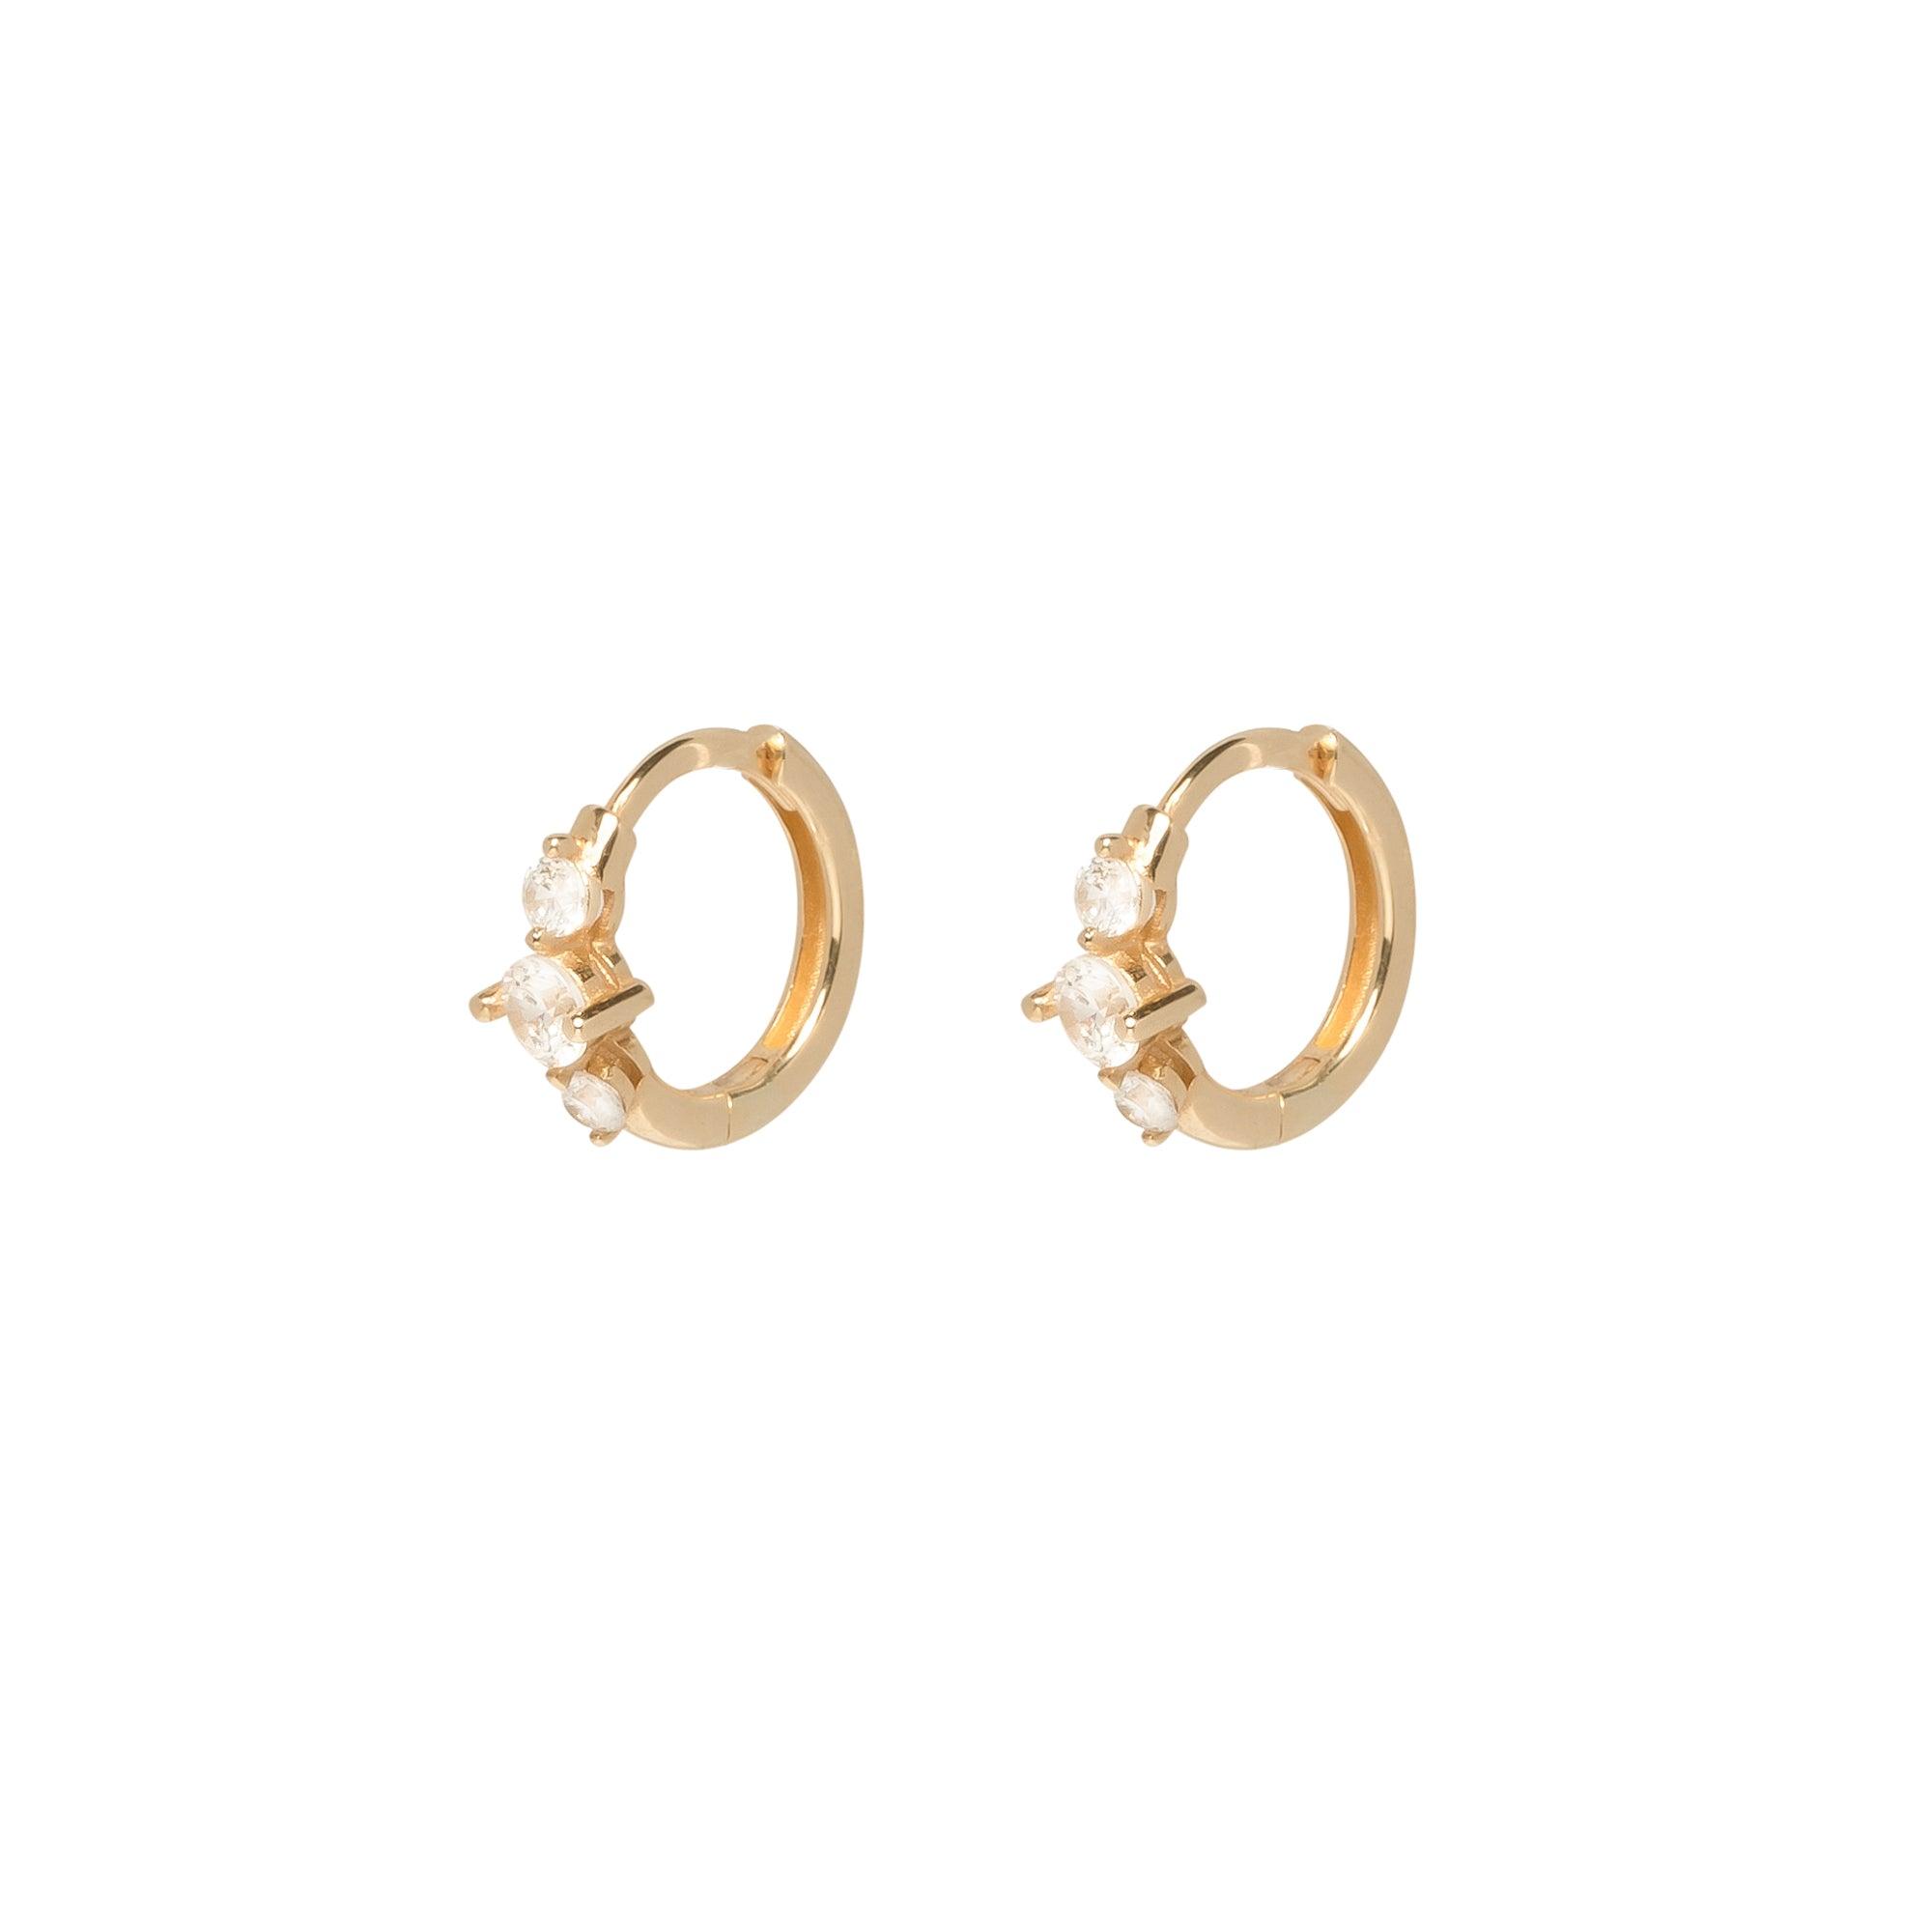 Let there be light 9k Gold Hugggie Hoops - ELLA PALM